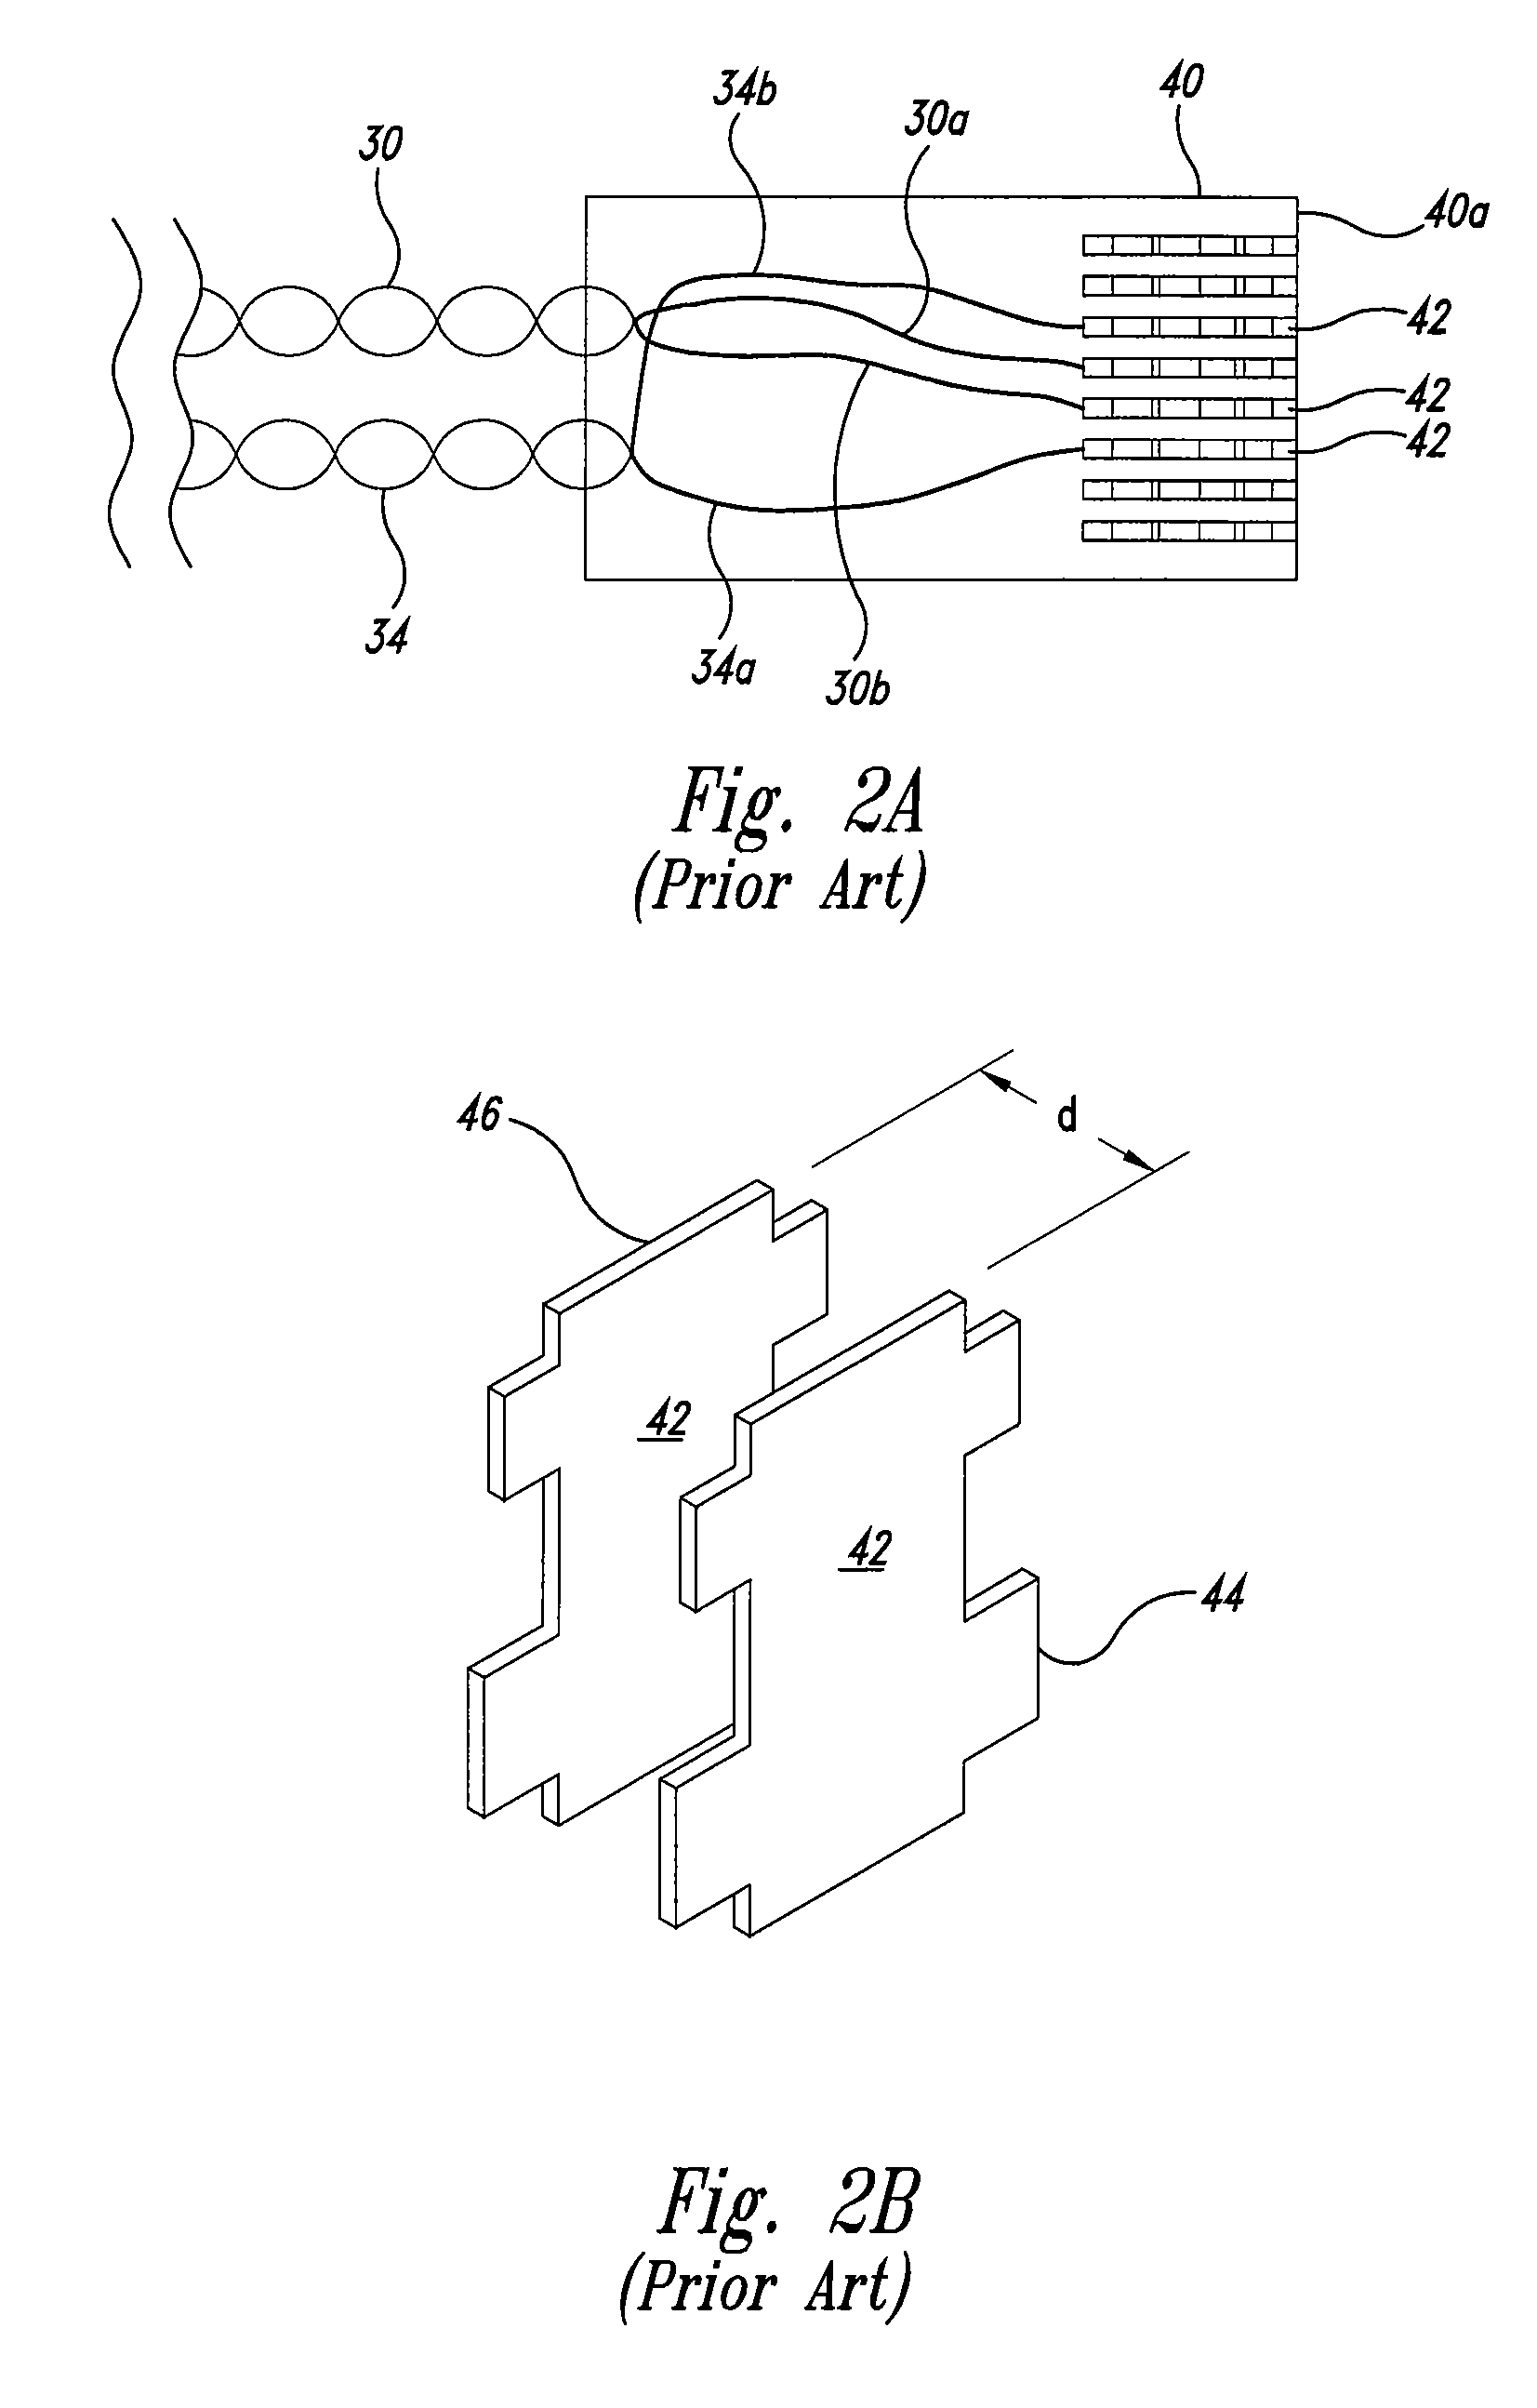 Compensation system and method for negative capacitive coupling in IDC